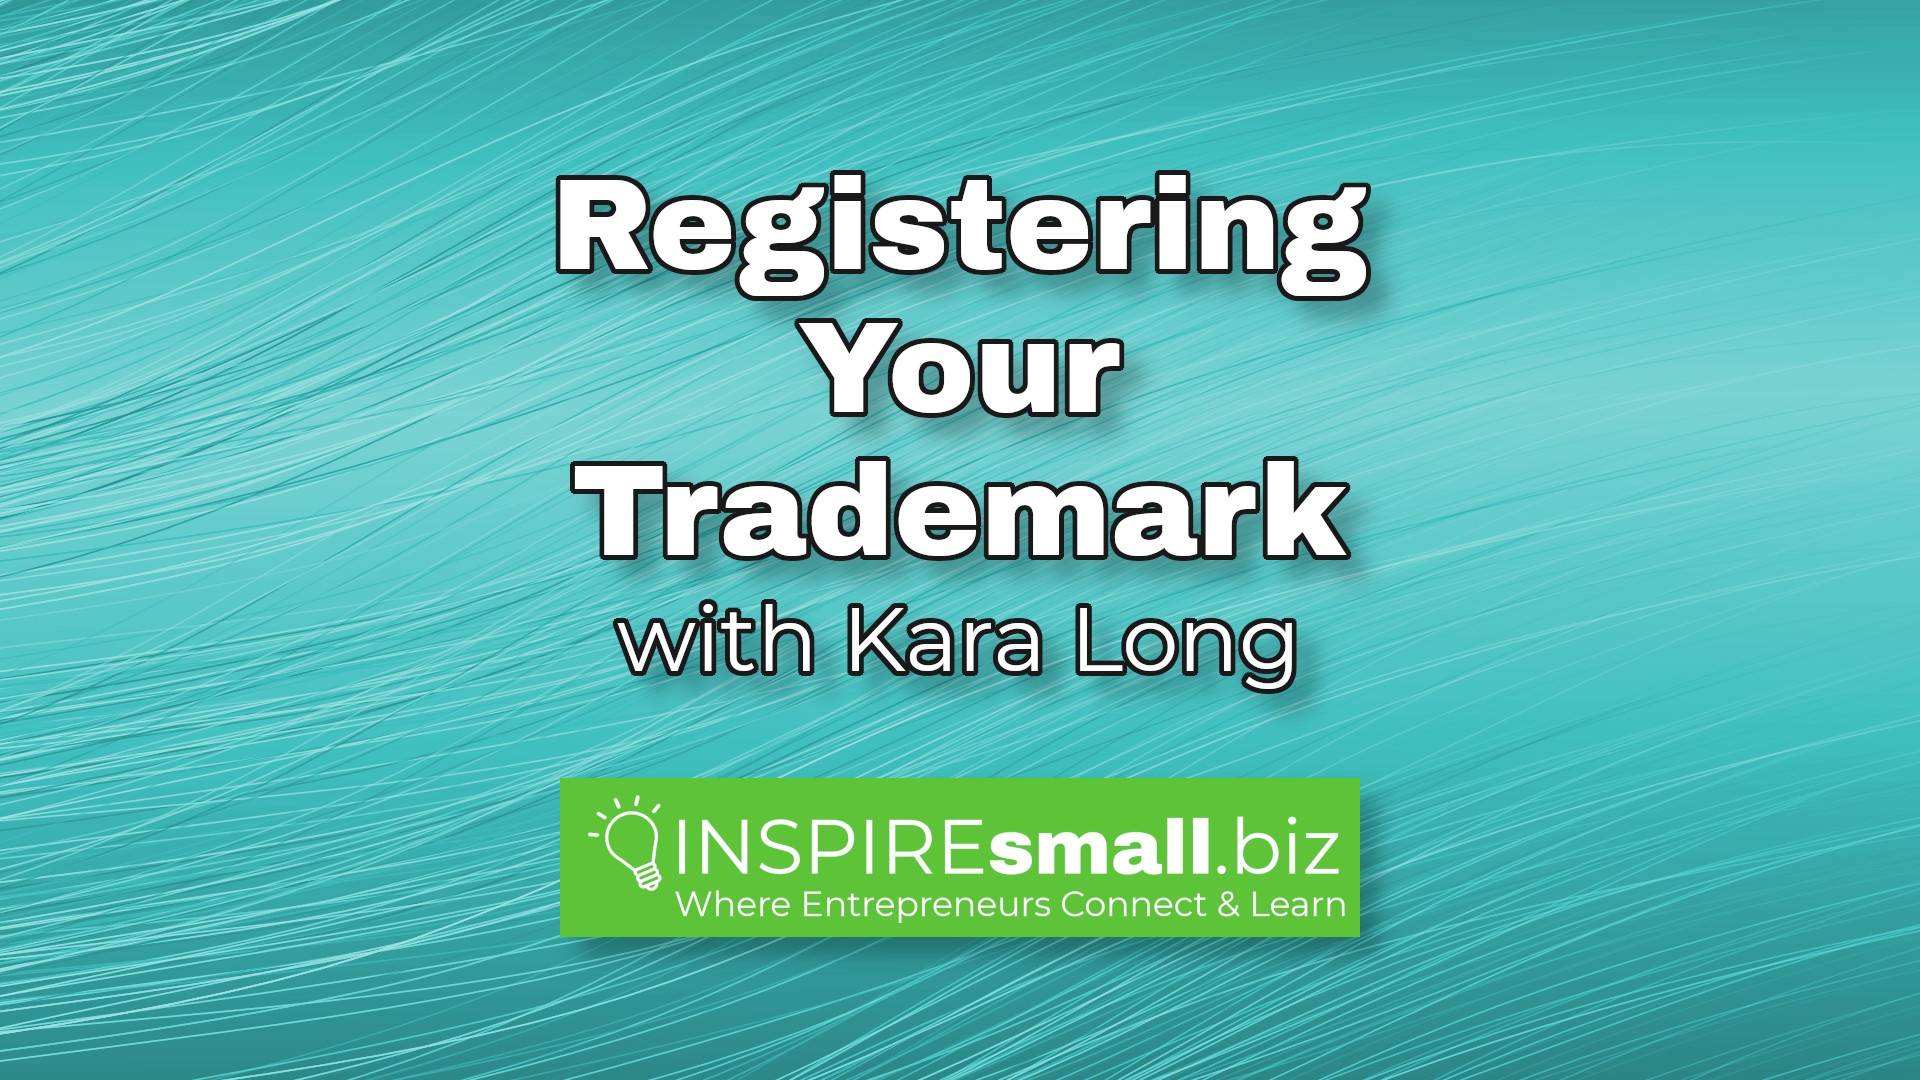 Registering Your Trademark with Kara Long. Text written over image of calming green lines